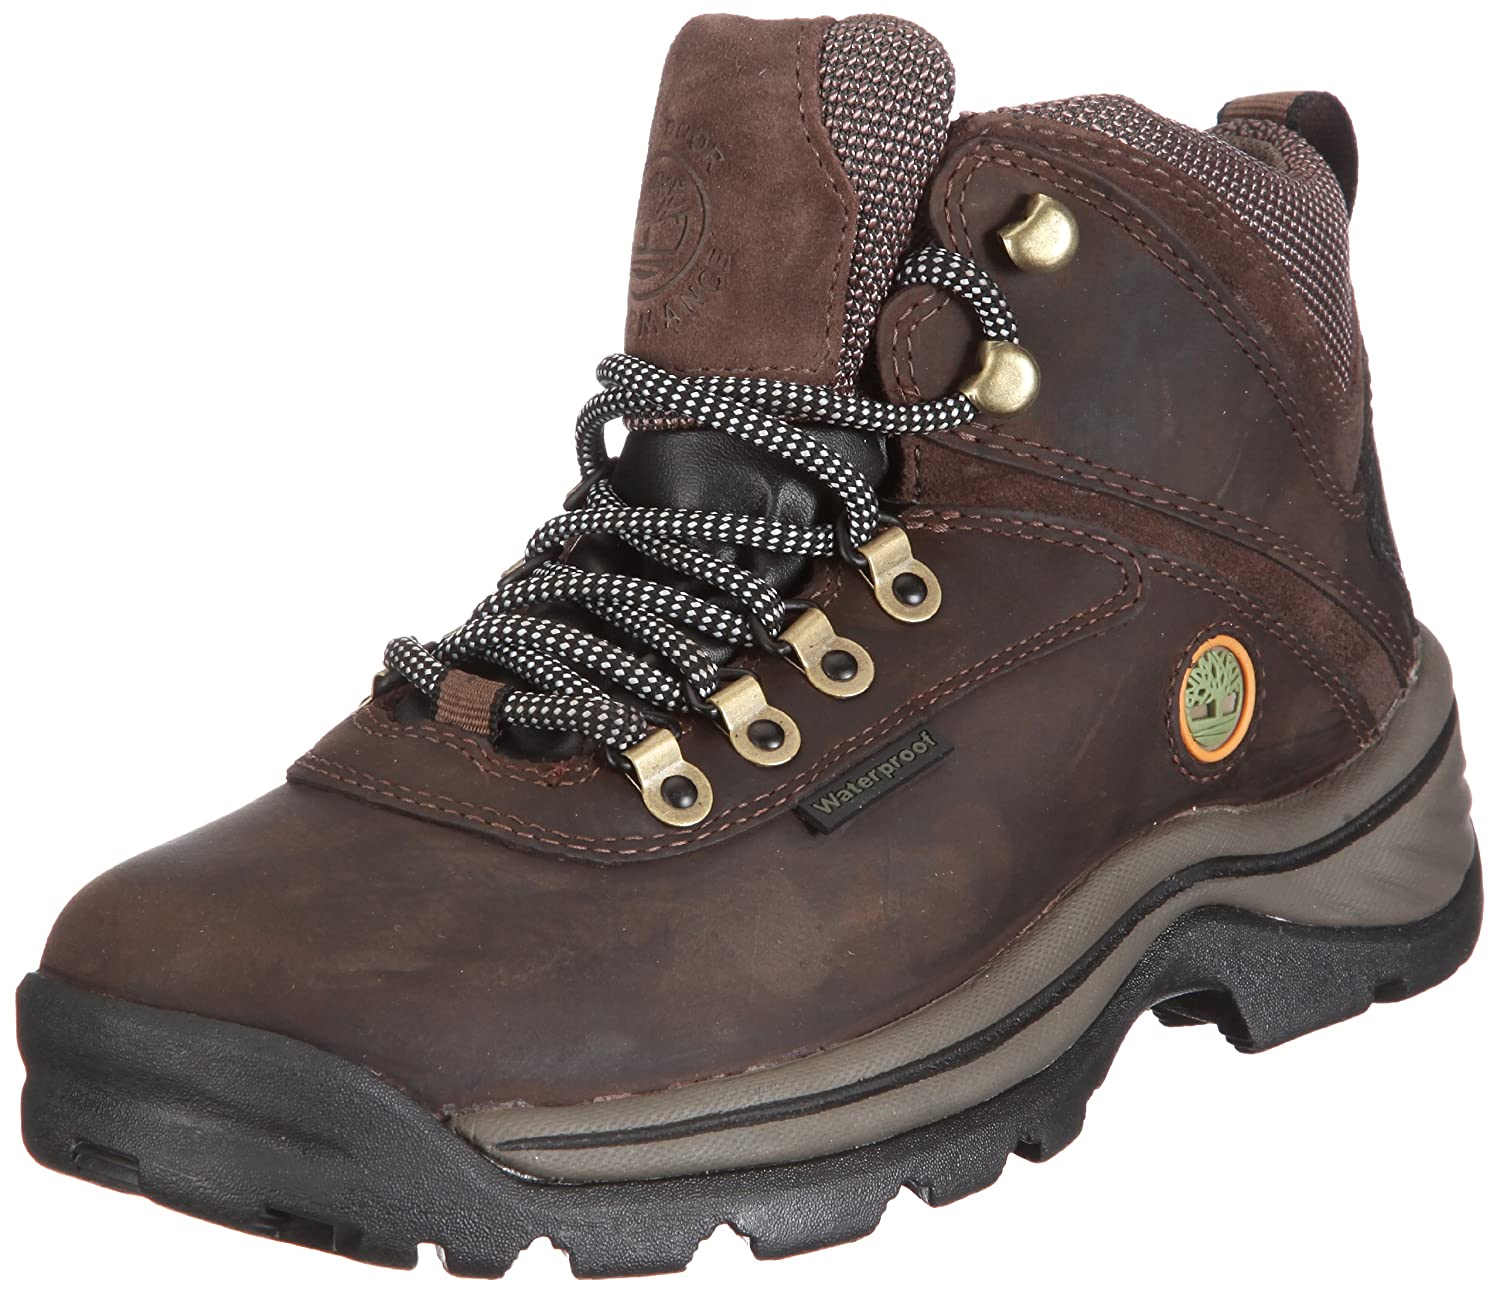 Timberland's Women's White Ledge Mid Waterproof Lace-up Boots